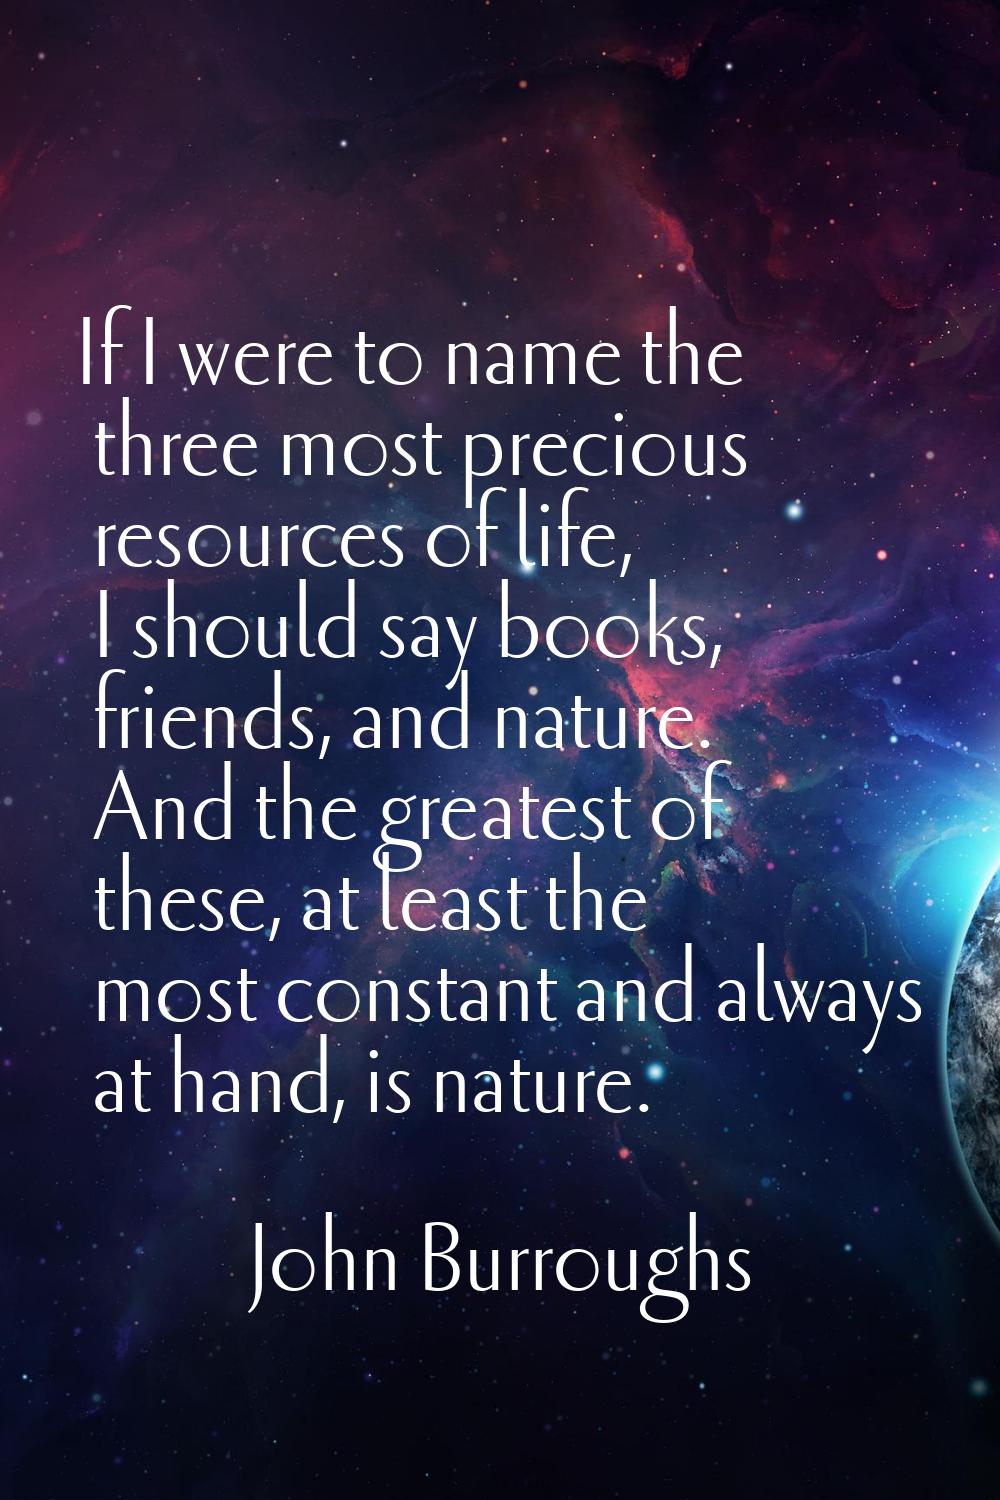 If I were to name the three most precious resources of life, I should say books, friends, and natur